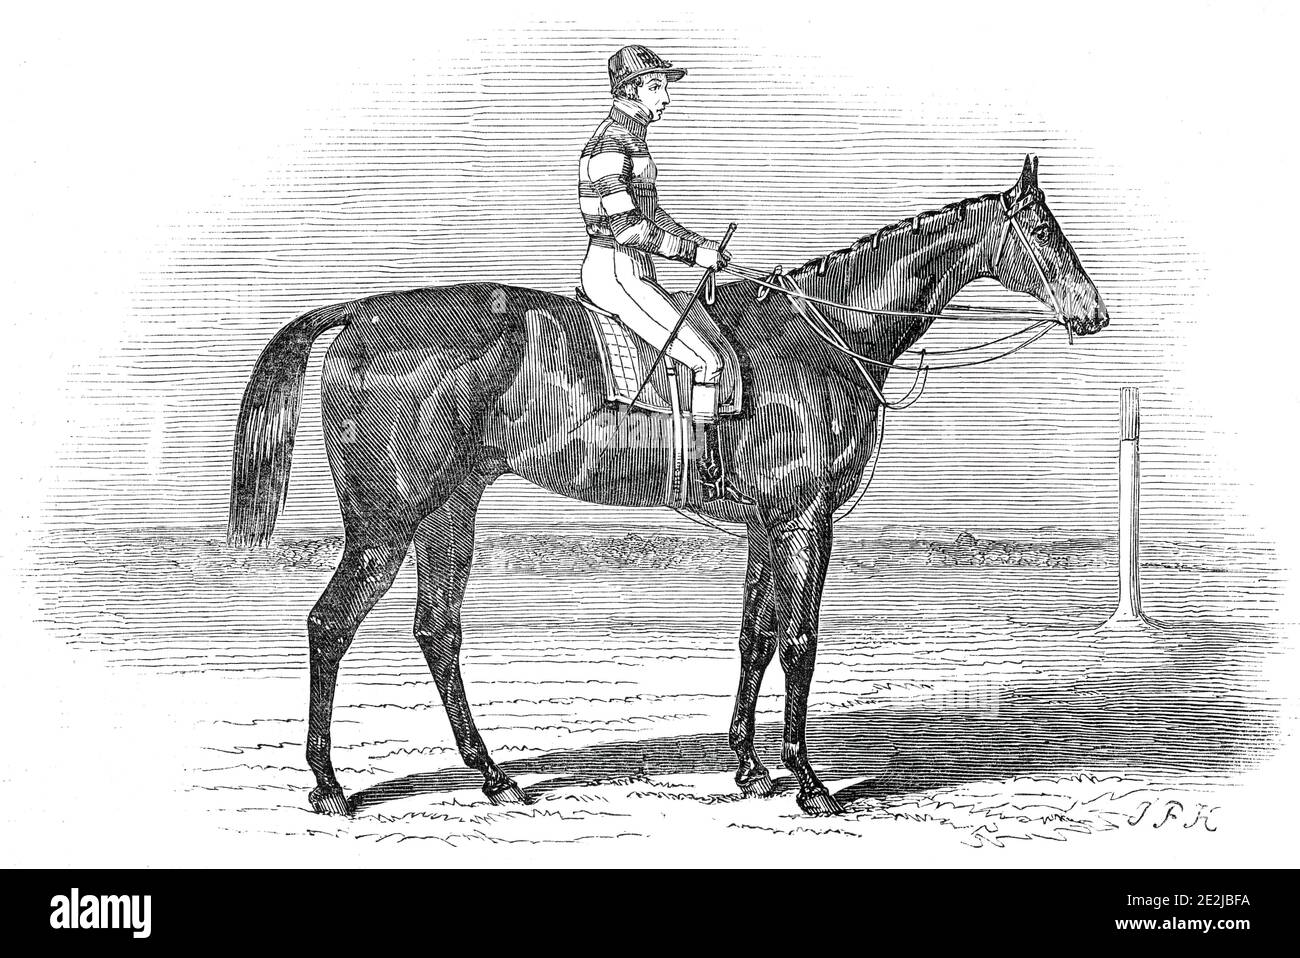 Sweetmeat, the winner of the Doncaster Plate, 1845. Jockey George Whitehouse on racehorse Sweetmeat. 'The winner of the Piece of Plate at Doncaster, is a dark-brown Colt, three years old, free from white, and not more than fifteen hands and a half high. He is, altogether, a very racing-looking nag, although possessing no peculiar points. His head is neat, and well set on to a light neck; his shoulders are strong, and well inclined back; large fore and back ribs...with excellent flat legs, and sound feet...The Messrs. Baily, Brothers, of Royal Exchange-buildings, Cornhill, have in the hands of Stock Photo